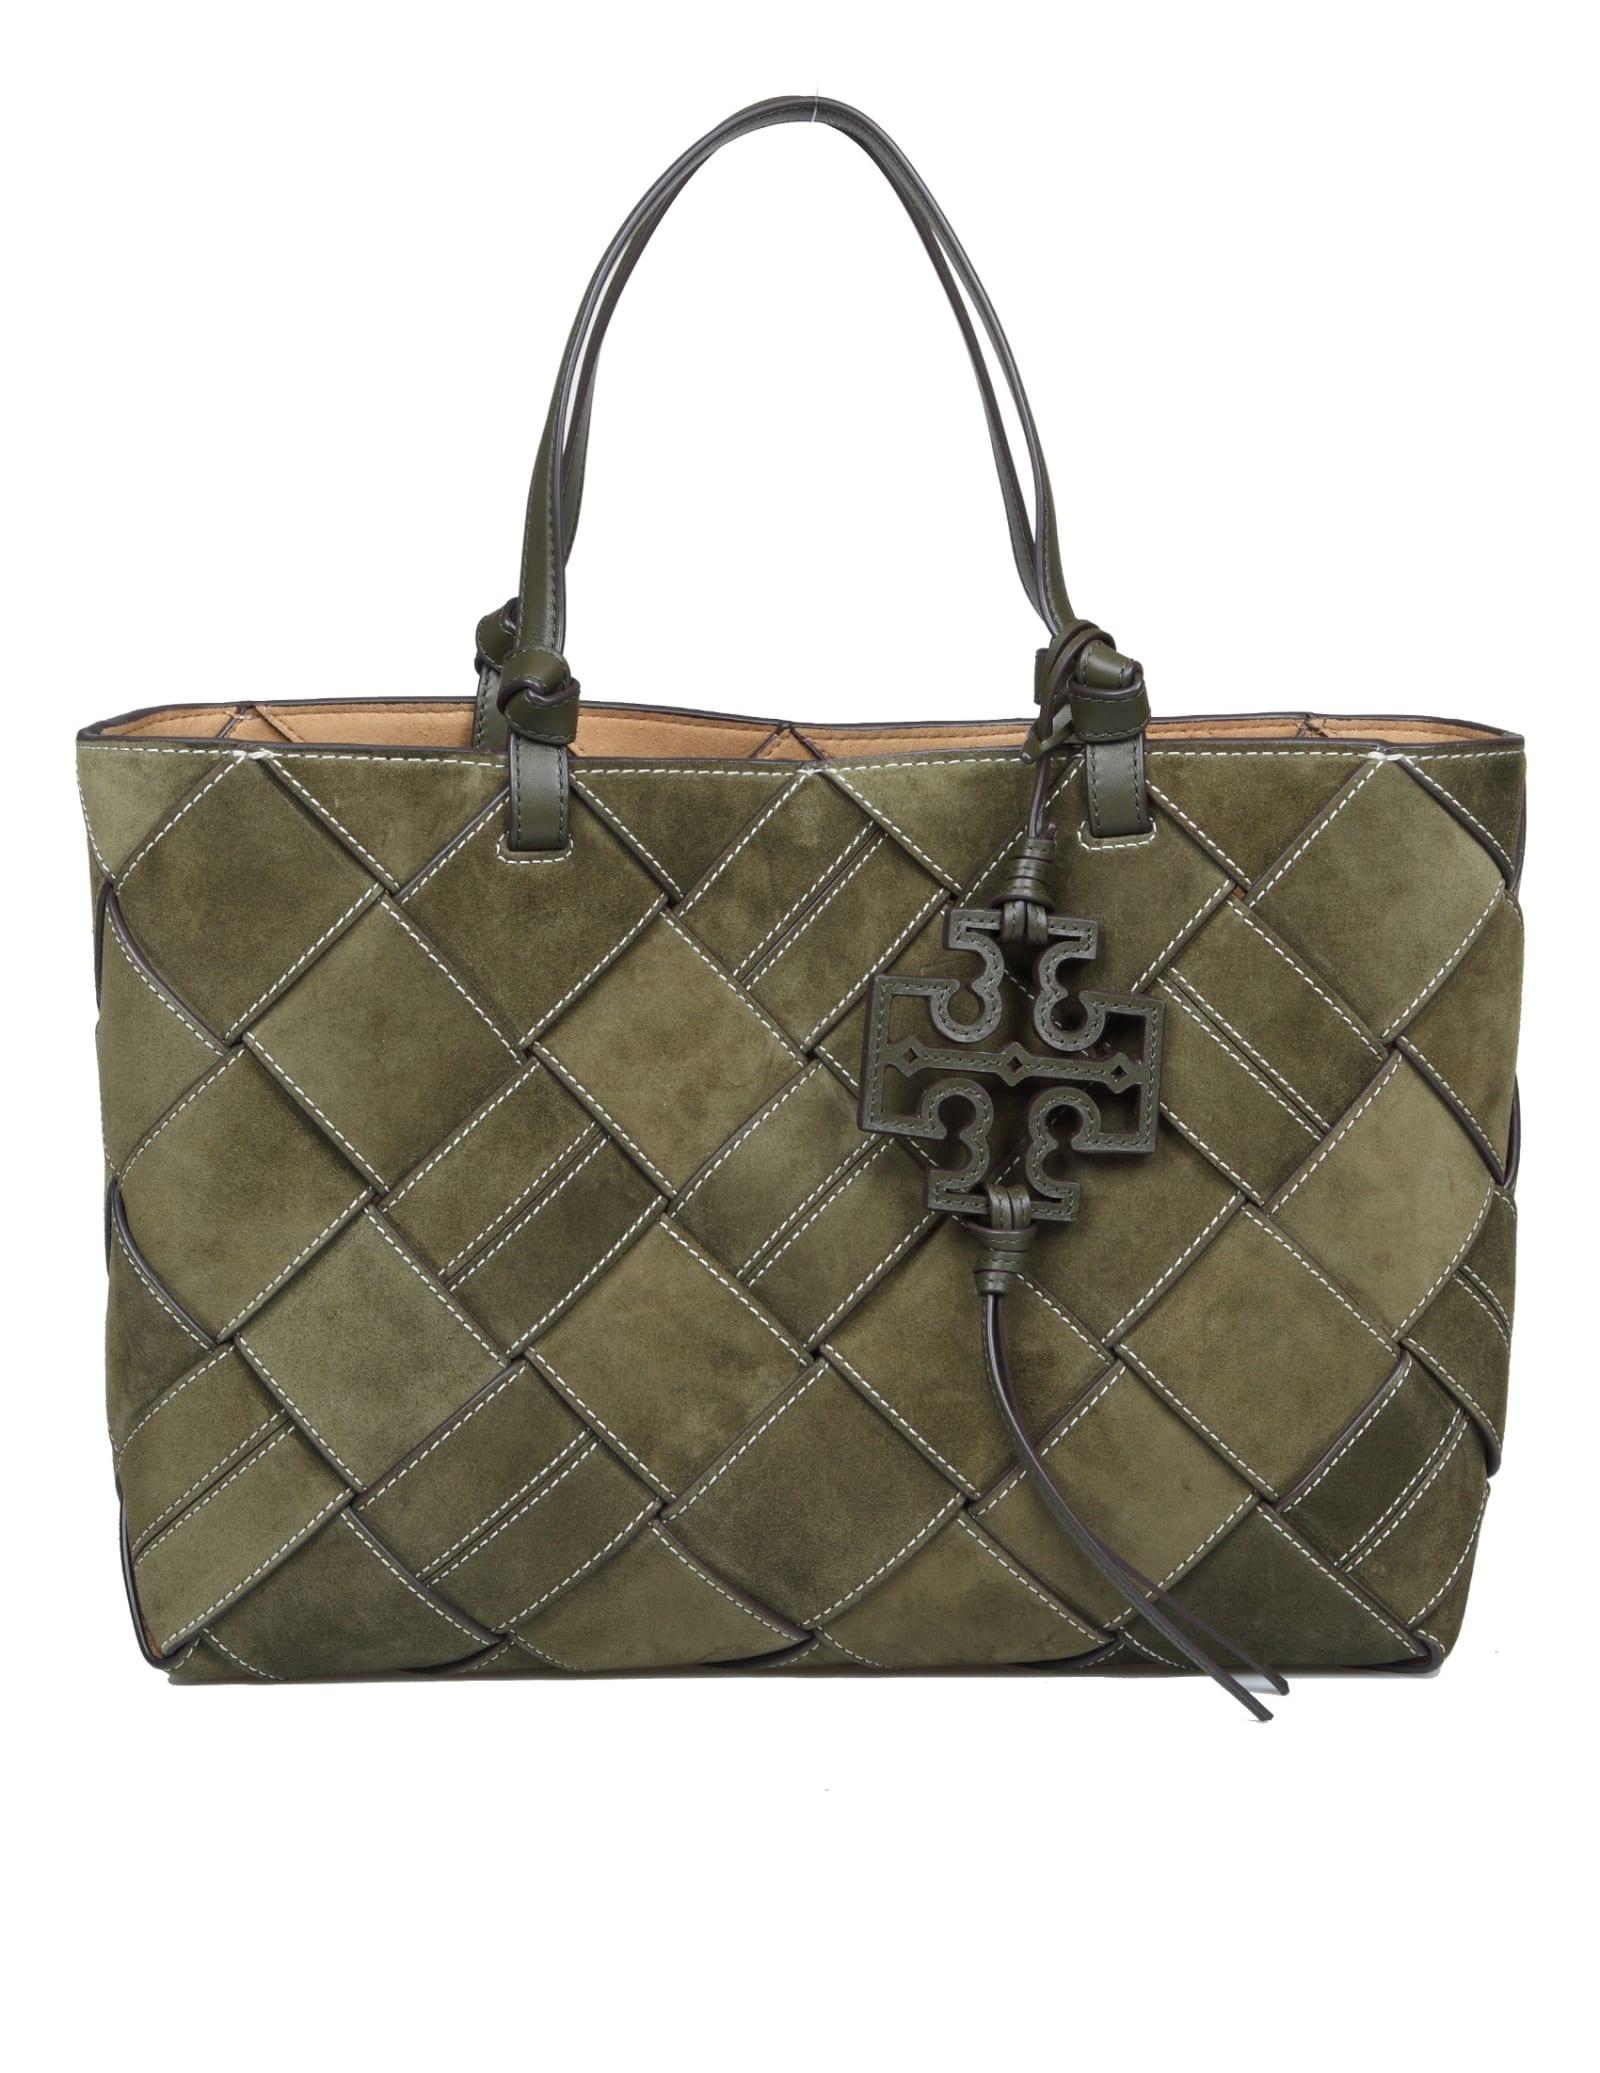 Tory Burch Miller Small Oversized Woven Suede Shoulder Bag